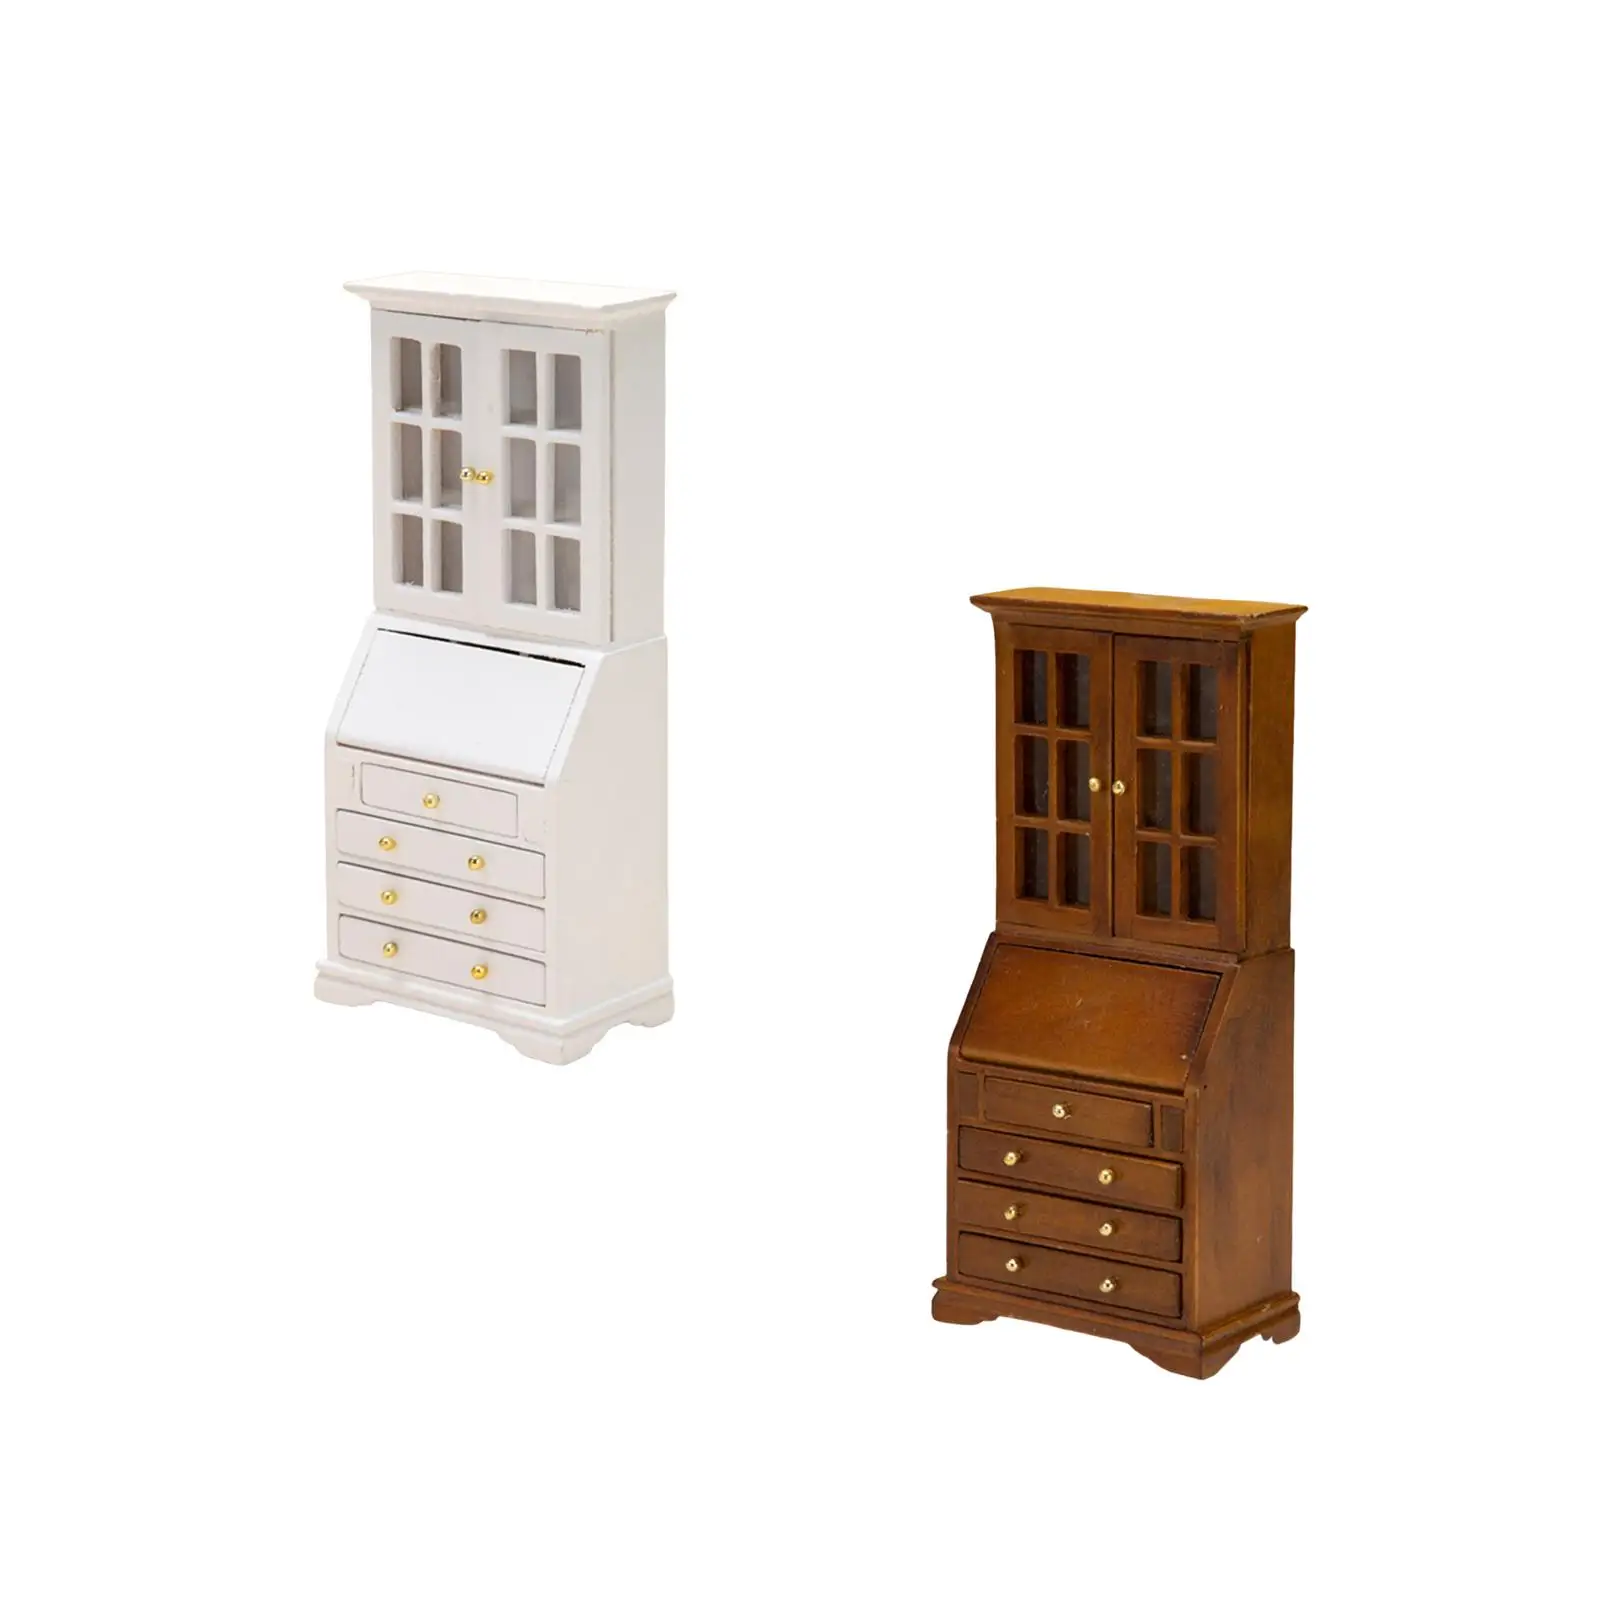 1/12 Dollhouse Bookcase Storage Cabinet Wood Model for Living Room 7x3.8x15.6cm Professional Simulated Landscape Delicate